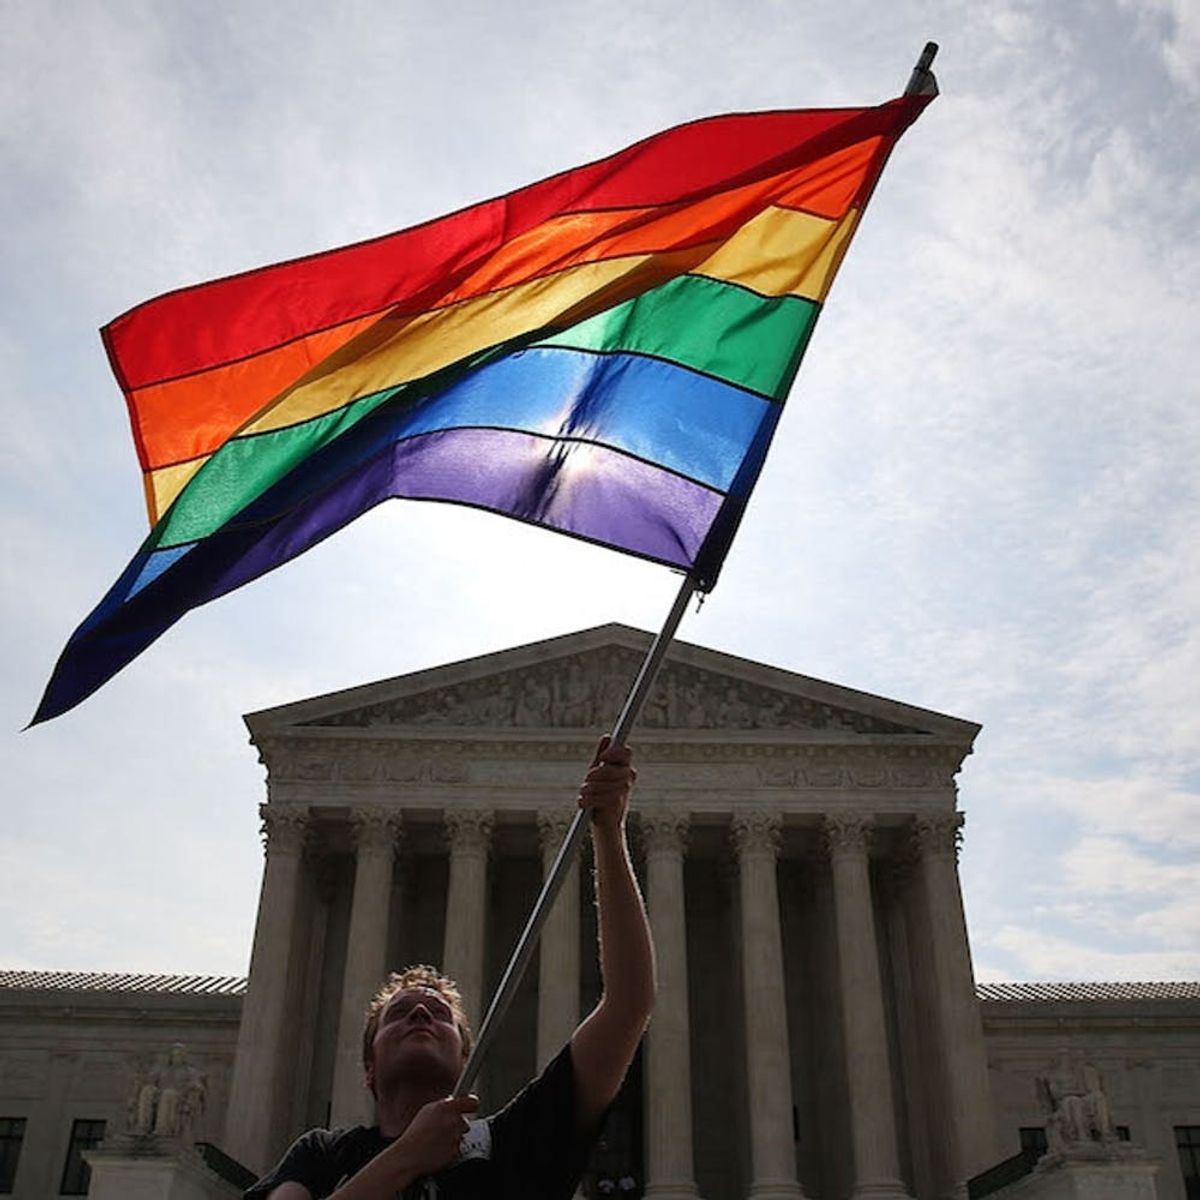 BREAKING: SCOTUS Just Made Major History With Gay Marriage Ruling